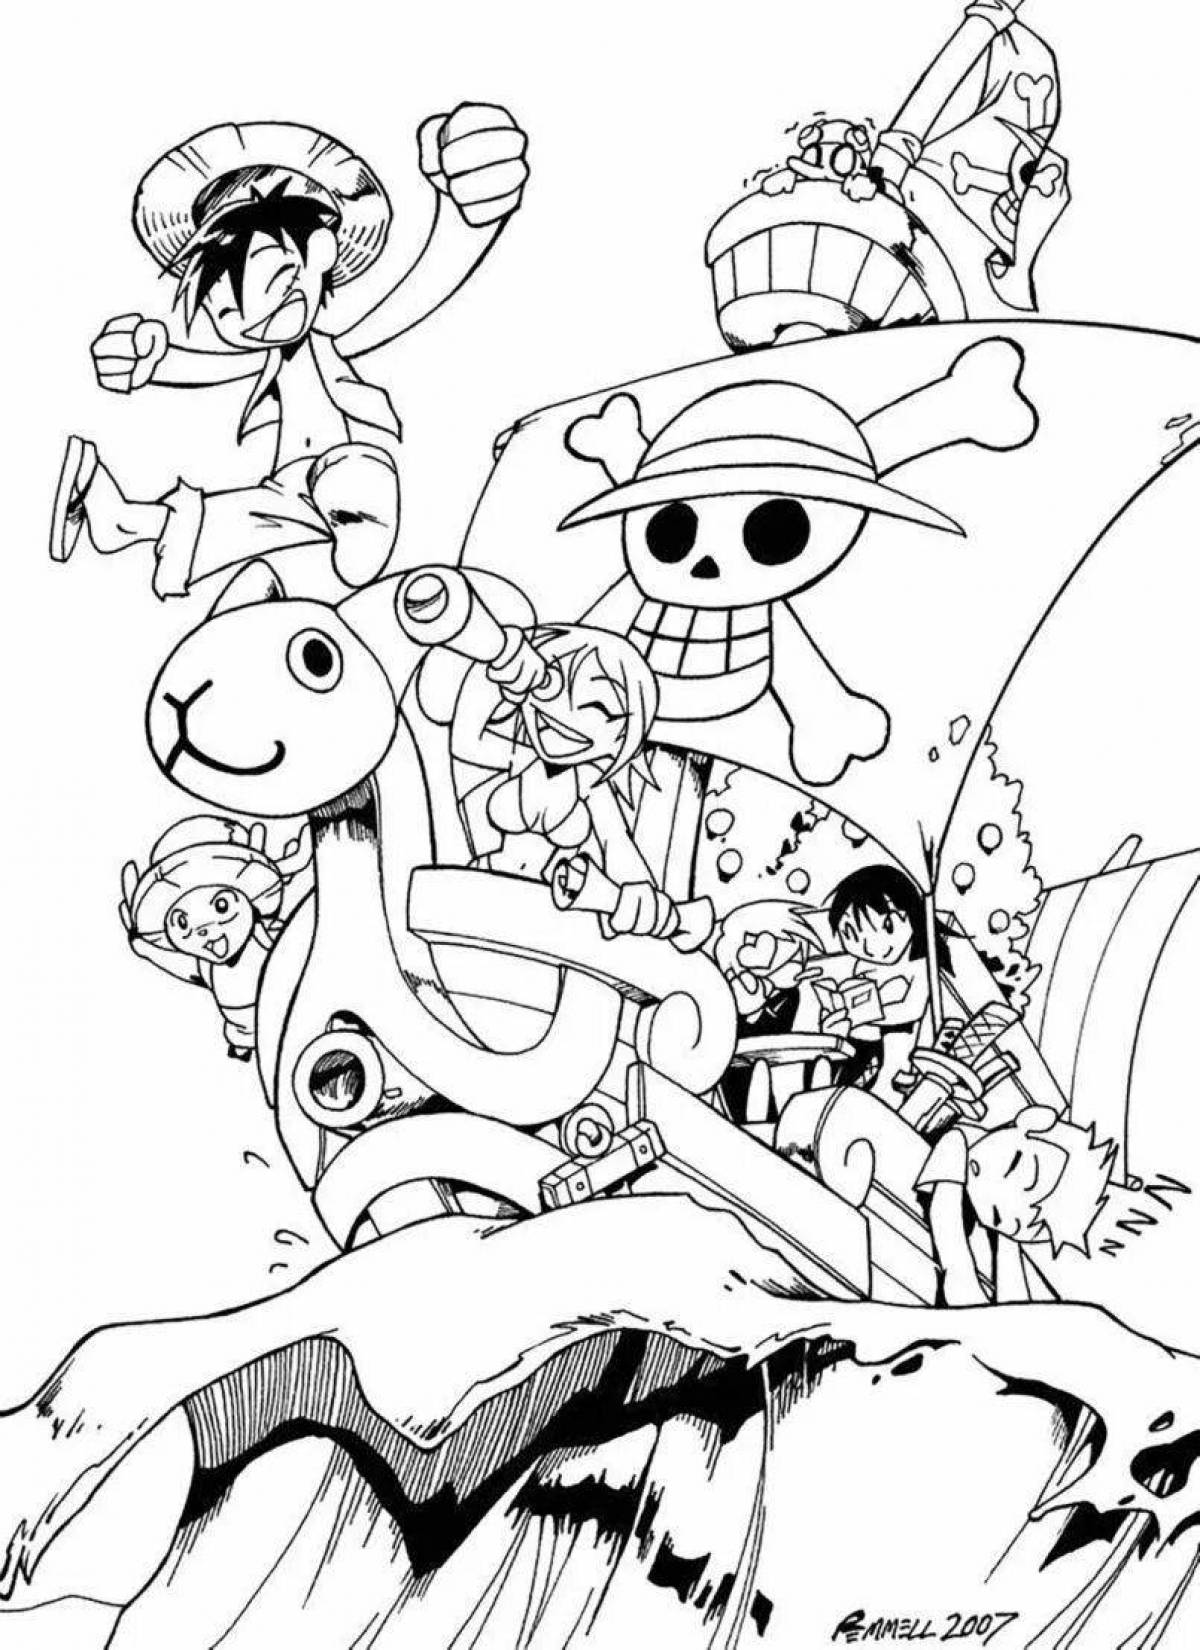 Charming luffy one piece coloring page